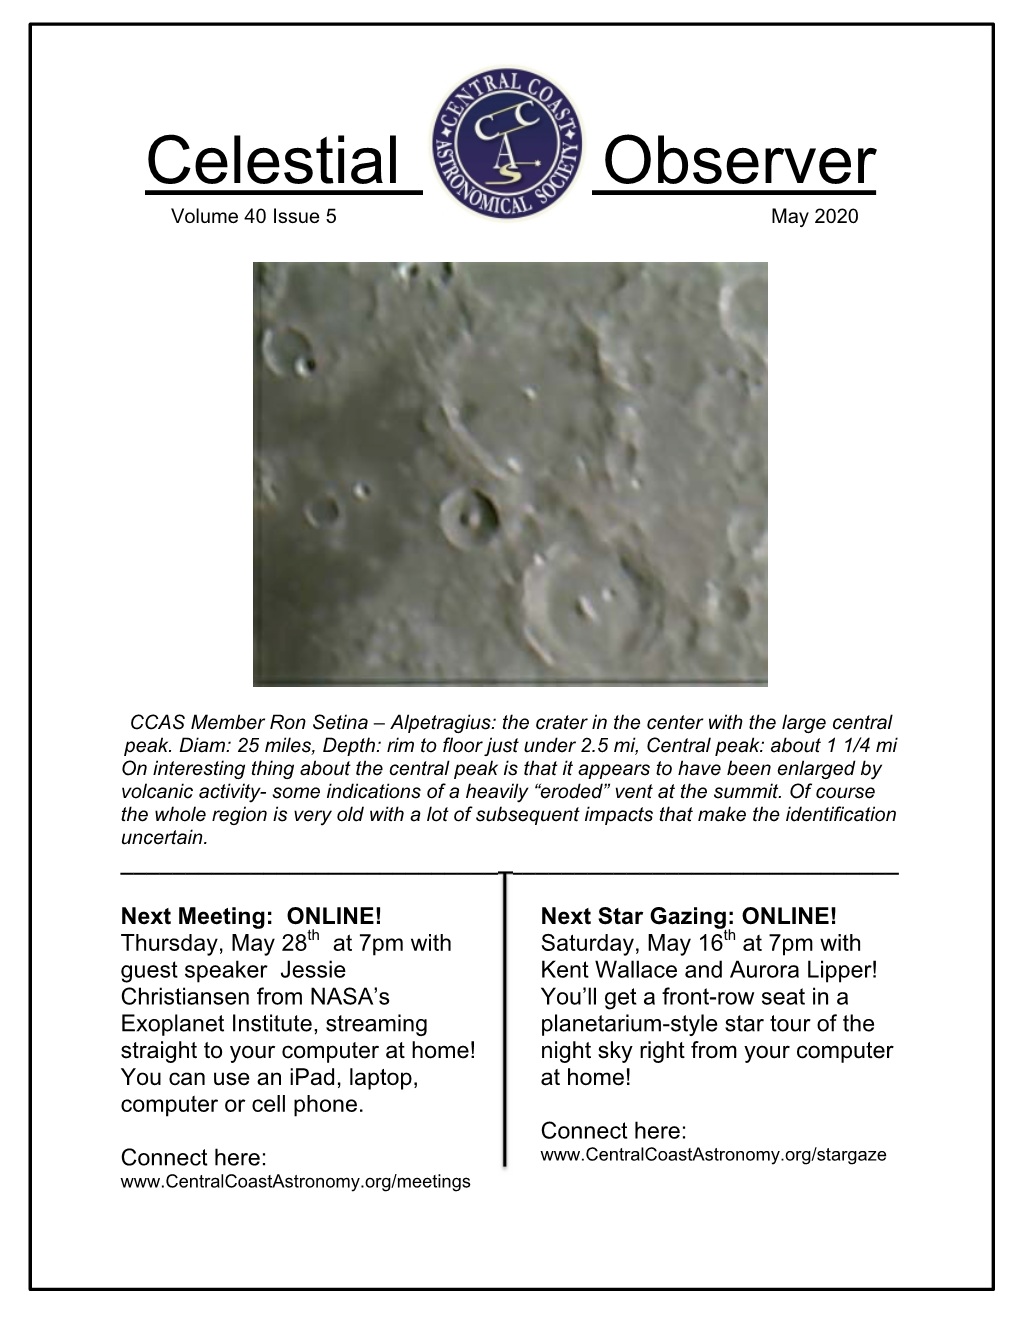 Celestial Observer Volume 40 Issue 5 May 2020